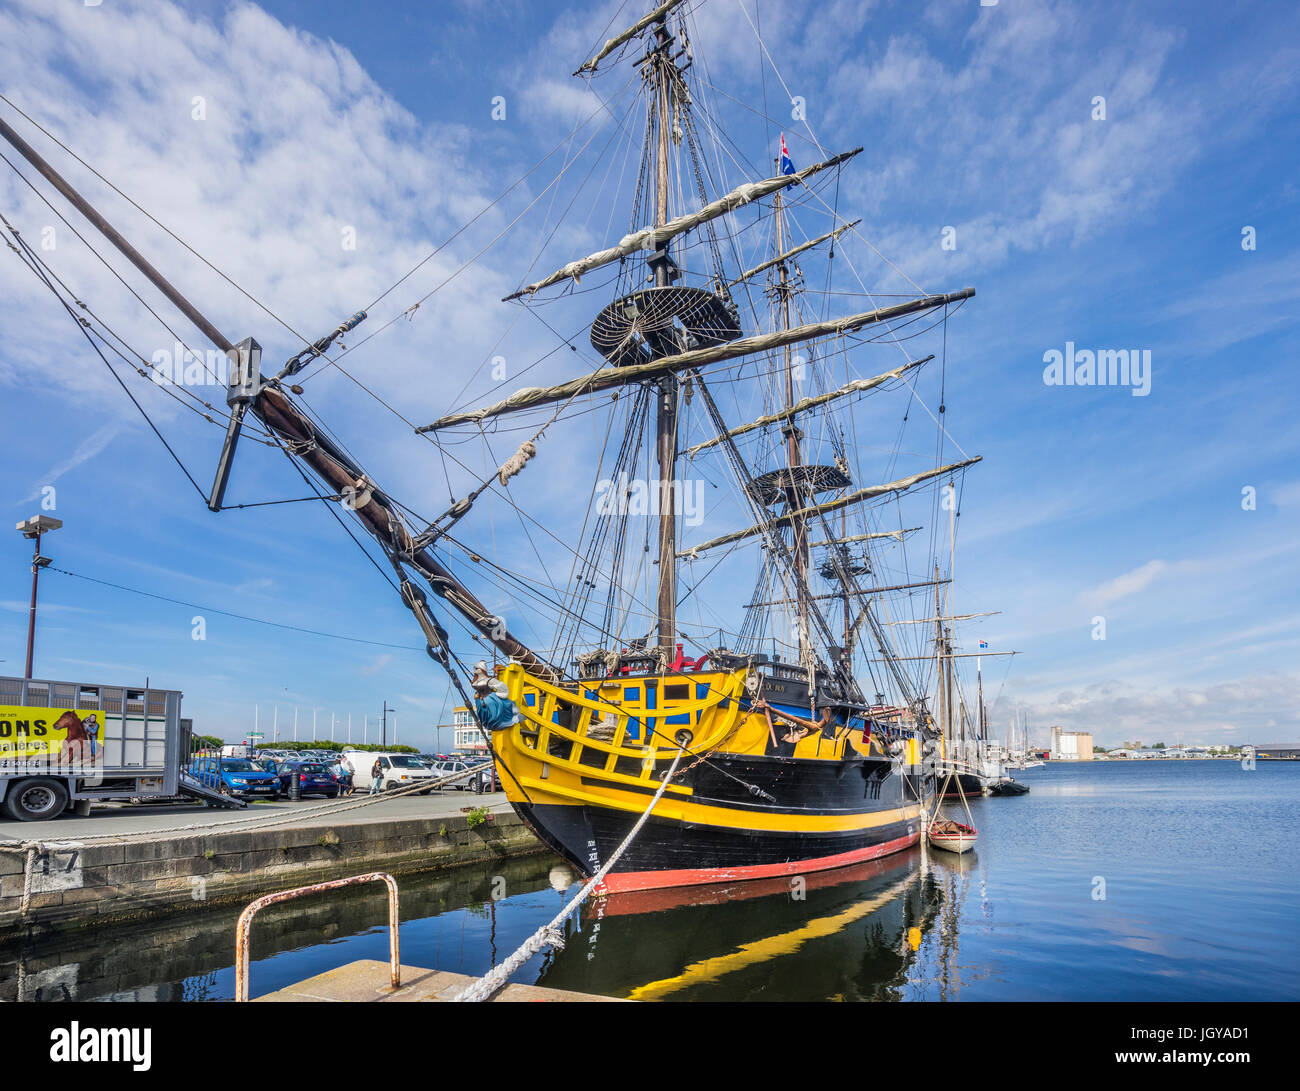 France, Brittany, Saint-Malo, Port, the three-masted frigate Etoille du Roy represents a Nelson-age warship Stock Photo